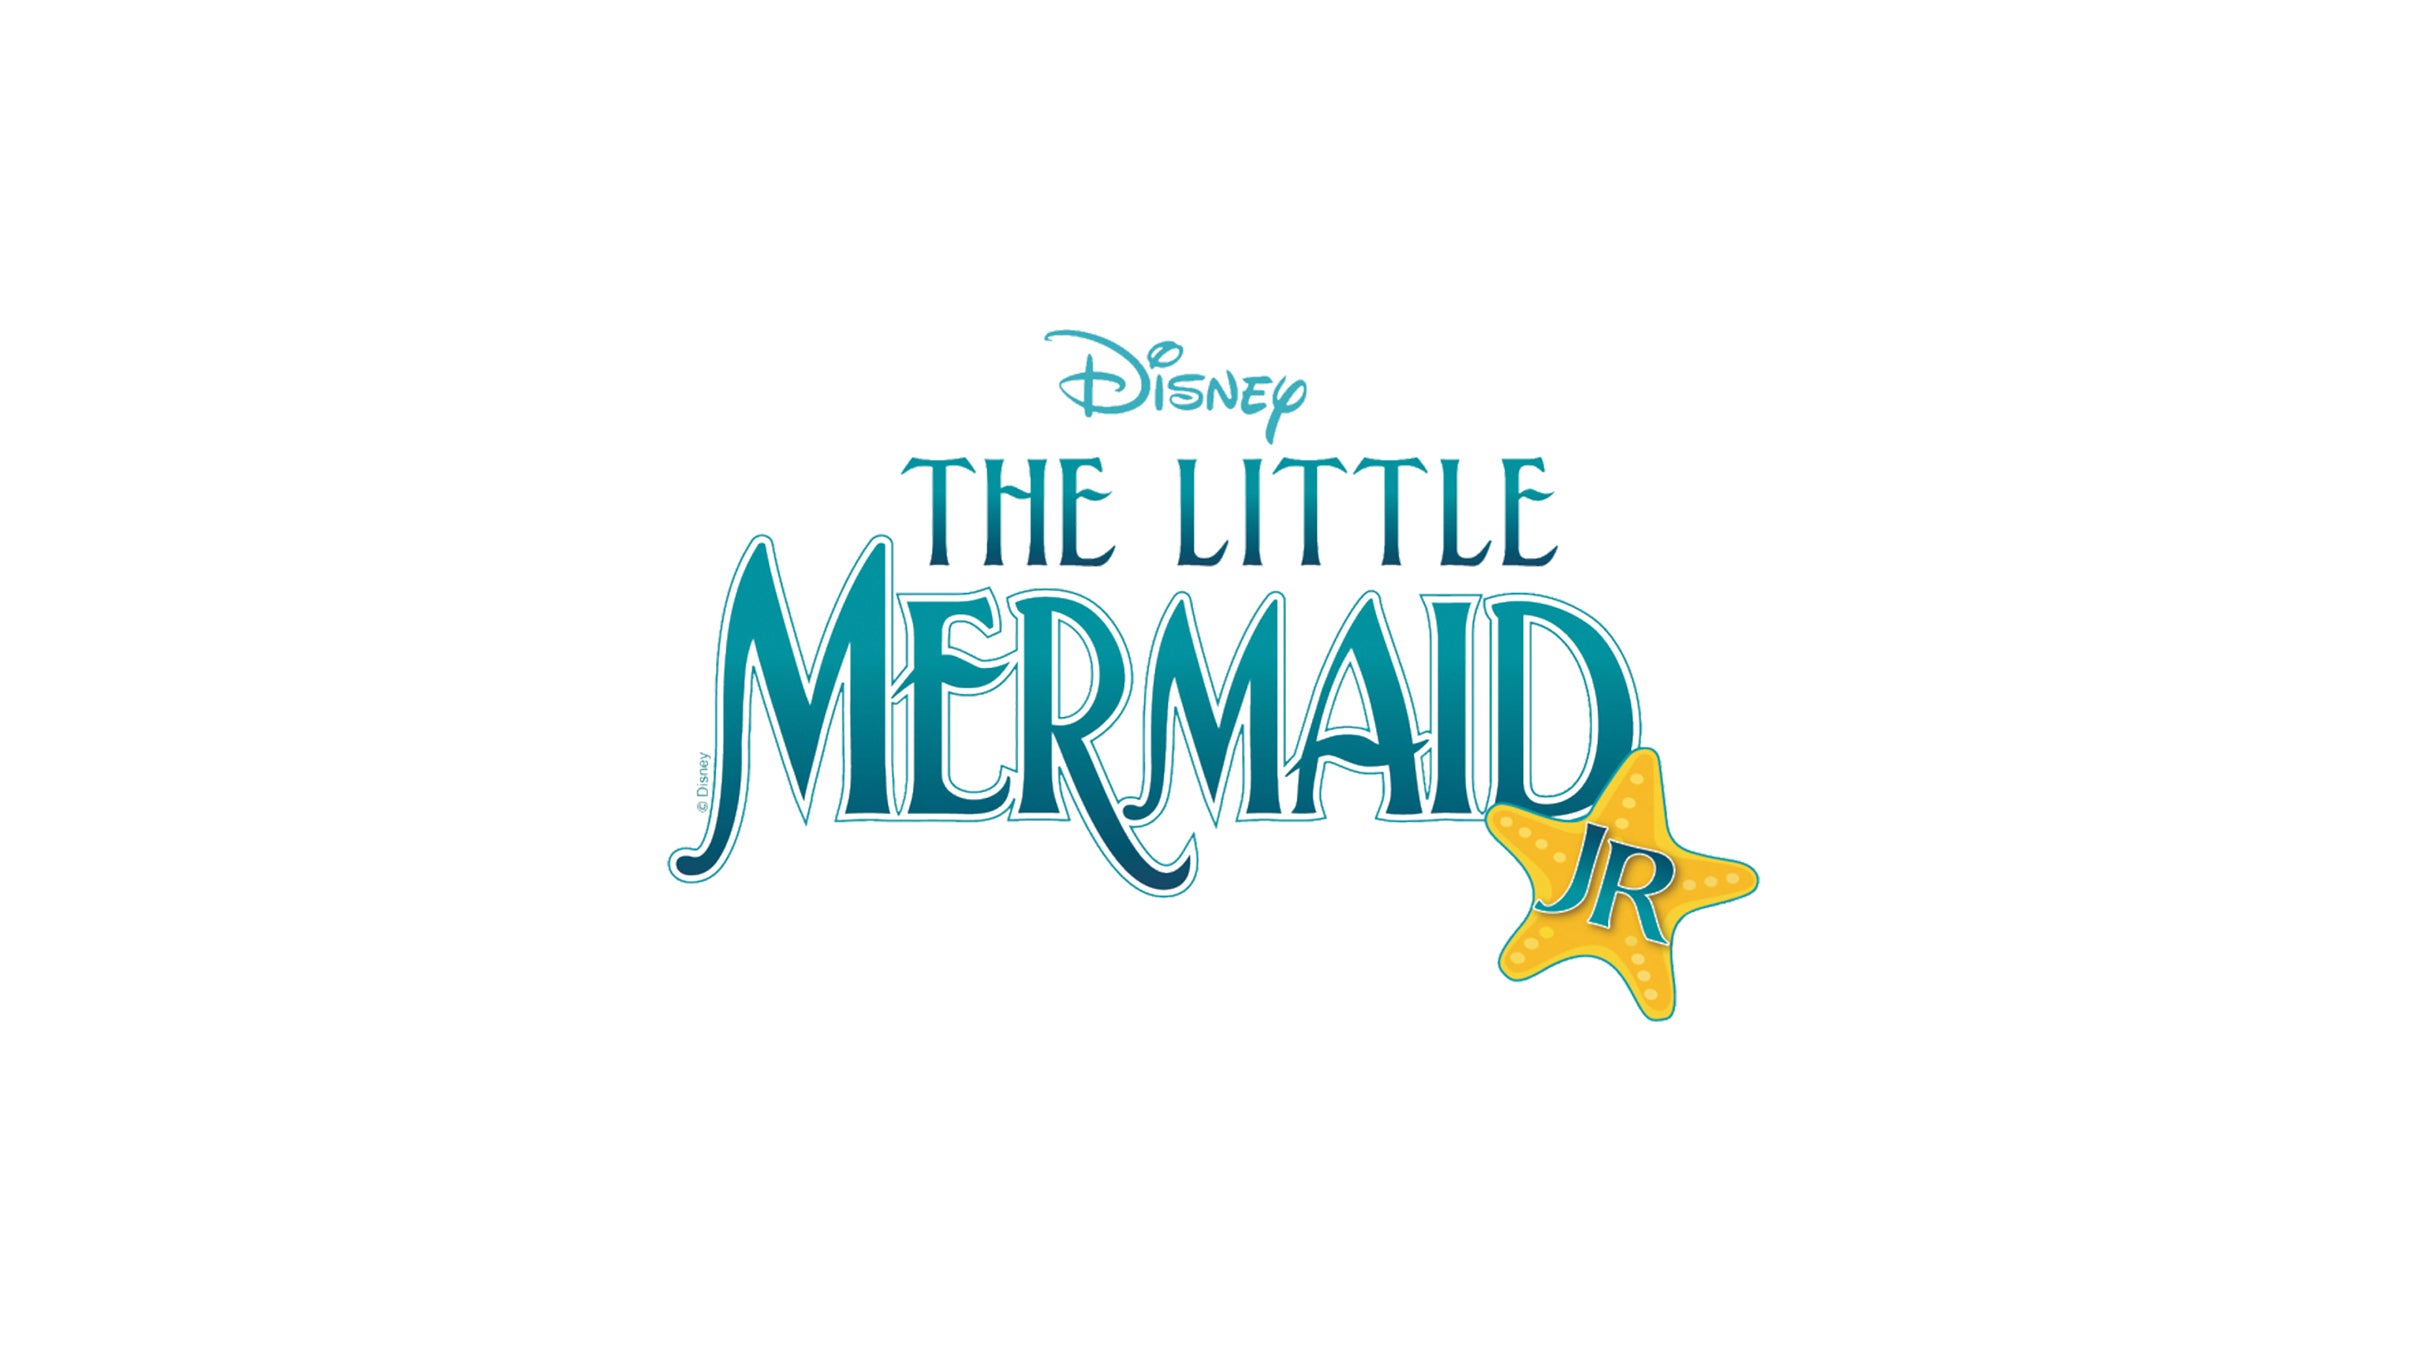 Disney’s The Little Mermaid JR. – Rancho Solano in Scottsdale promo photo for Early cast and crew access presale offer code